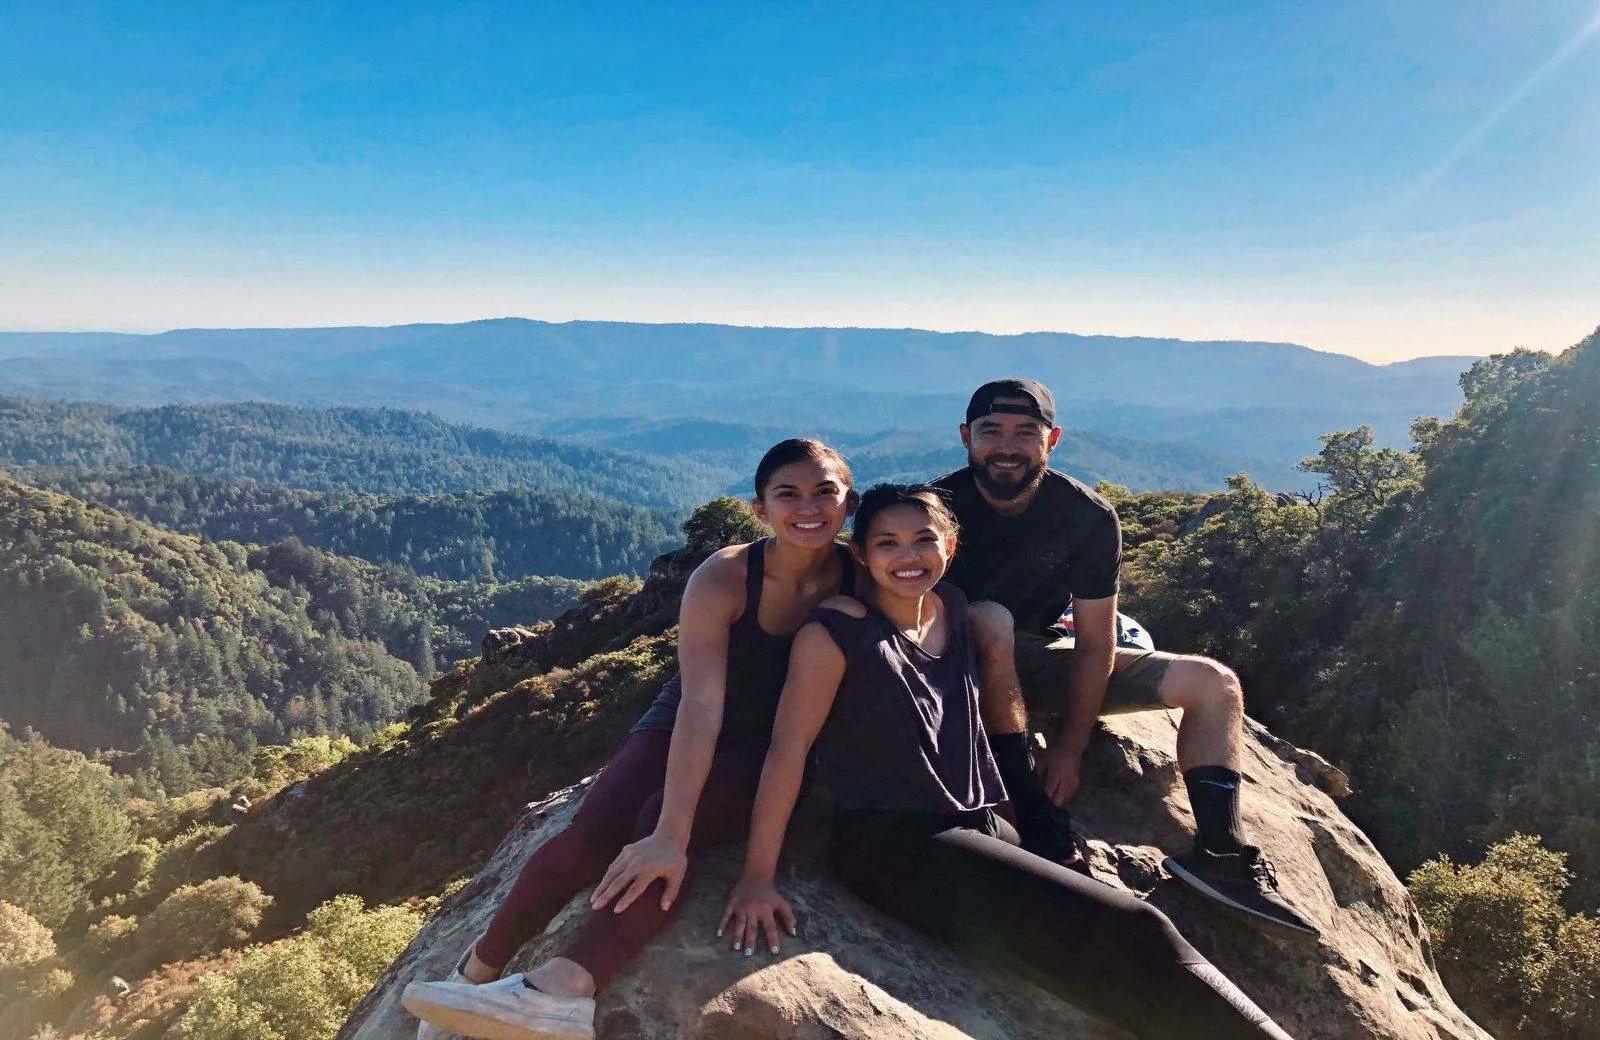 Goat rock is a fun thing to do in Northern California